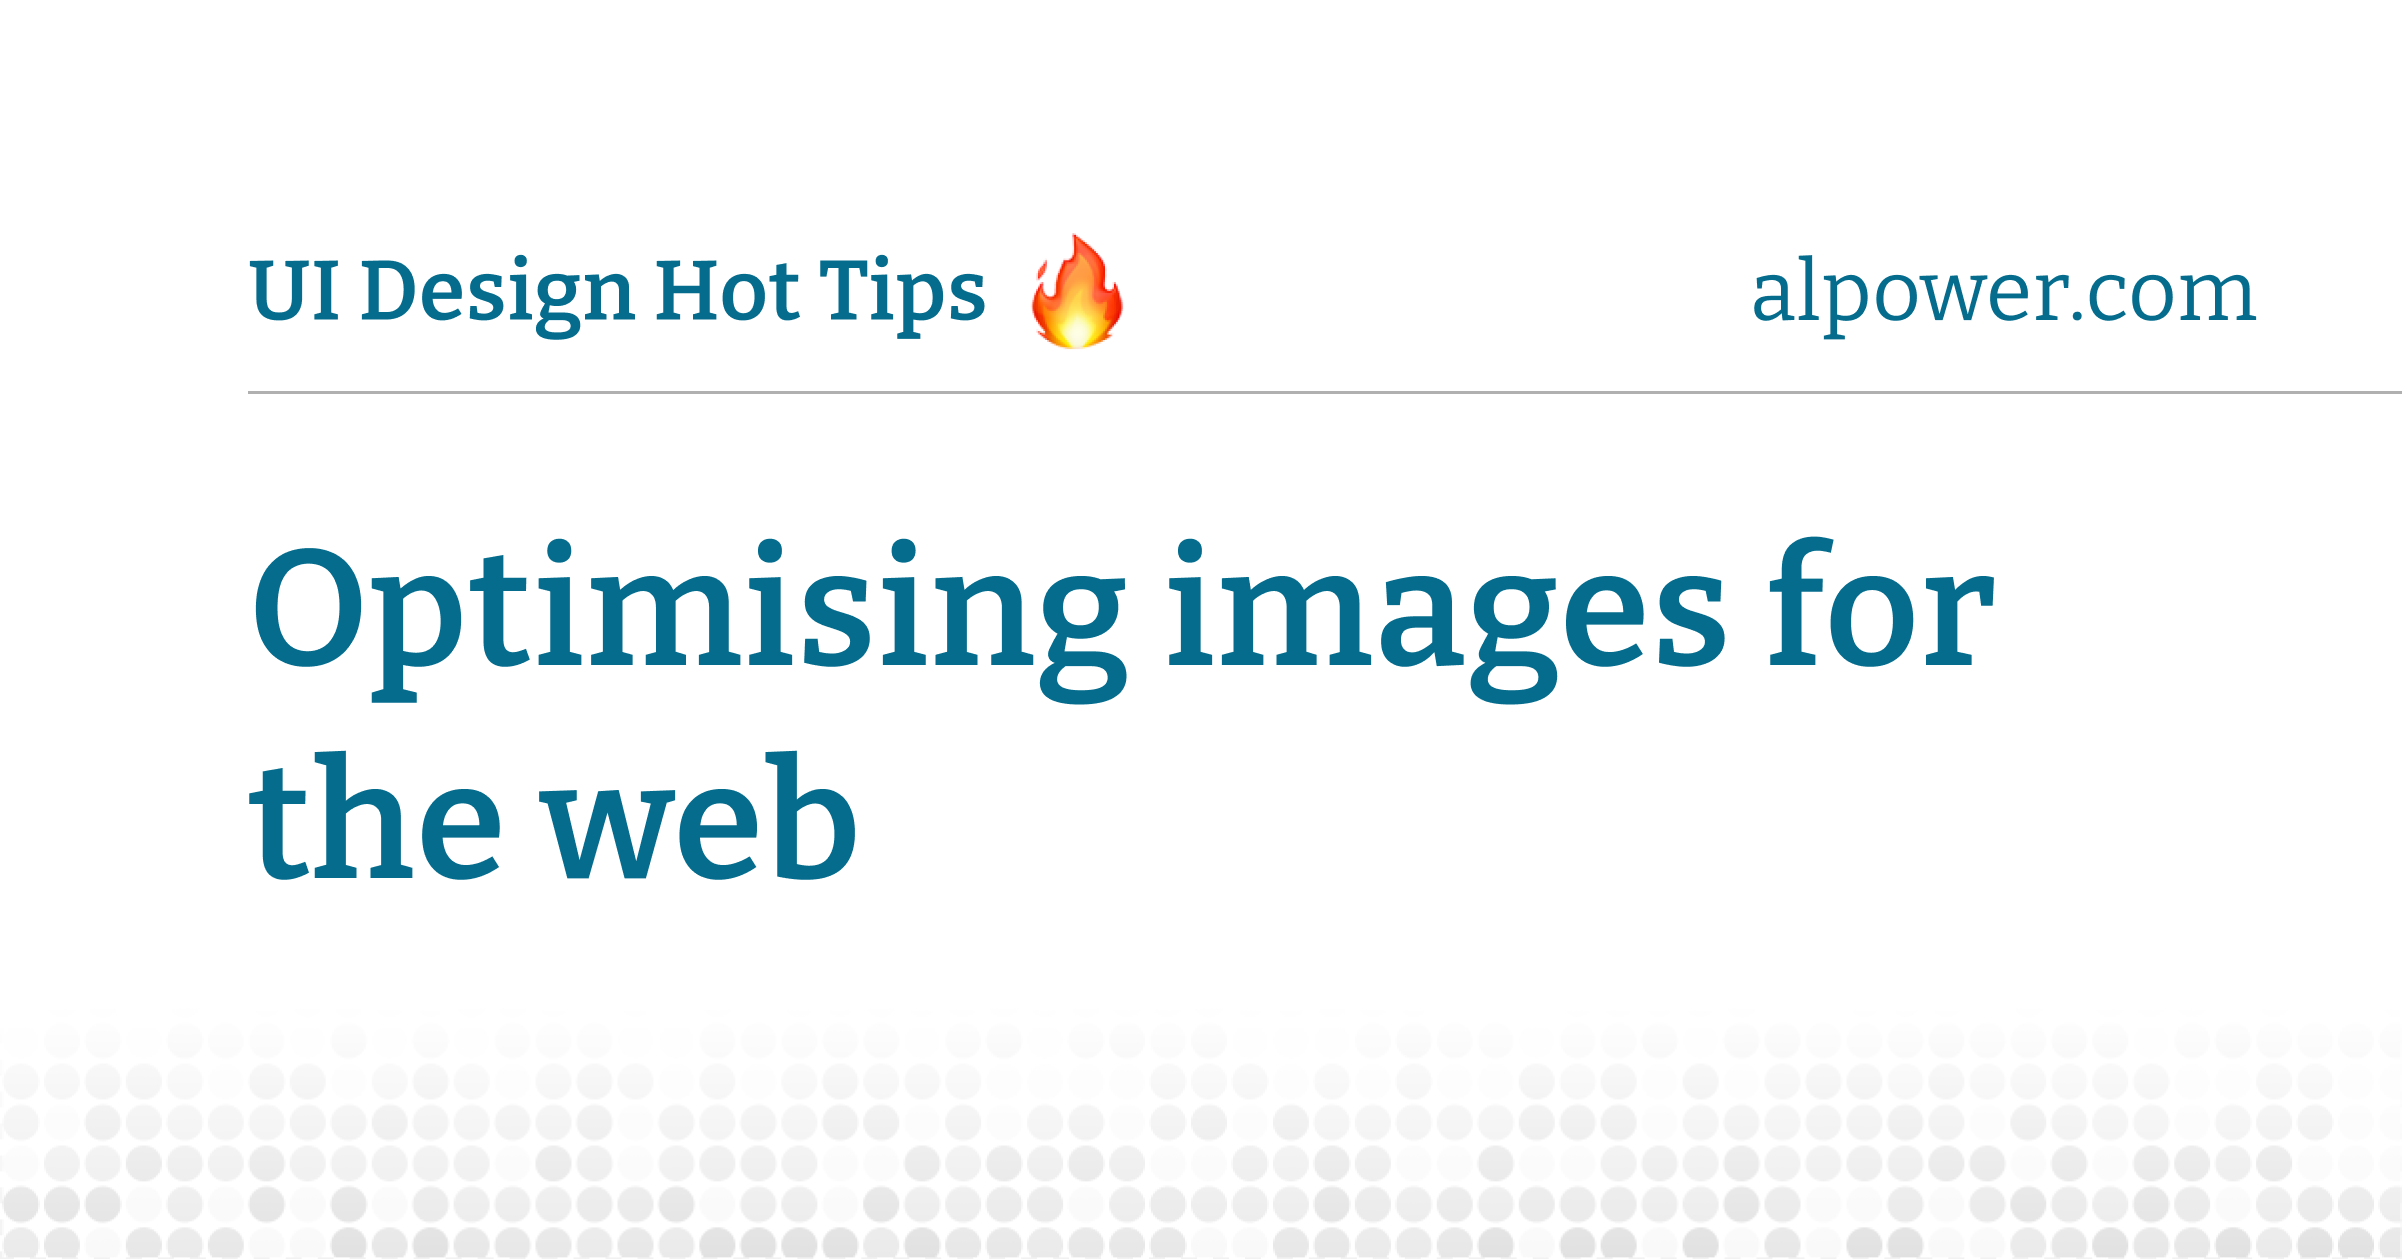 Optimising images for the web